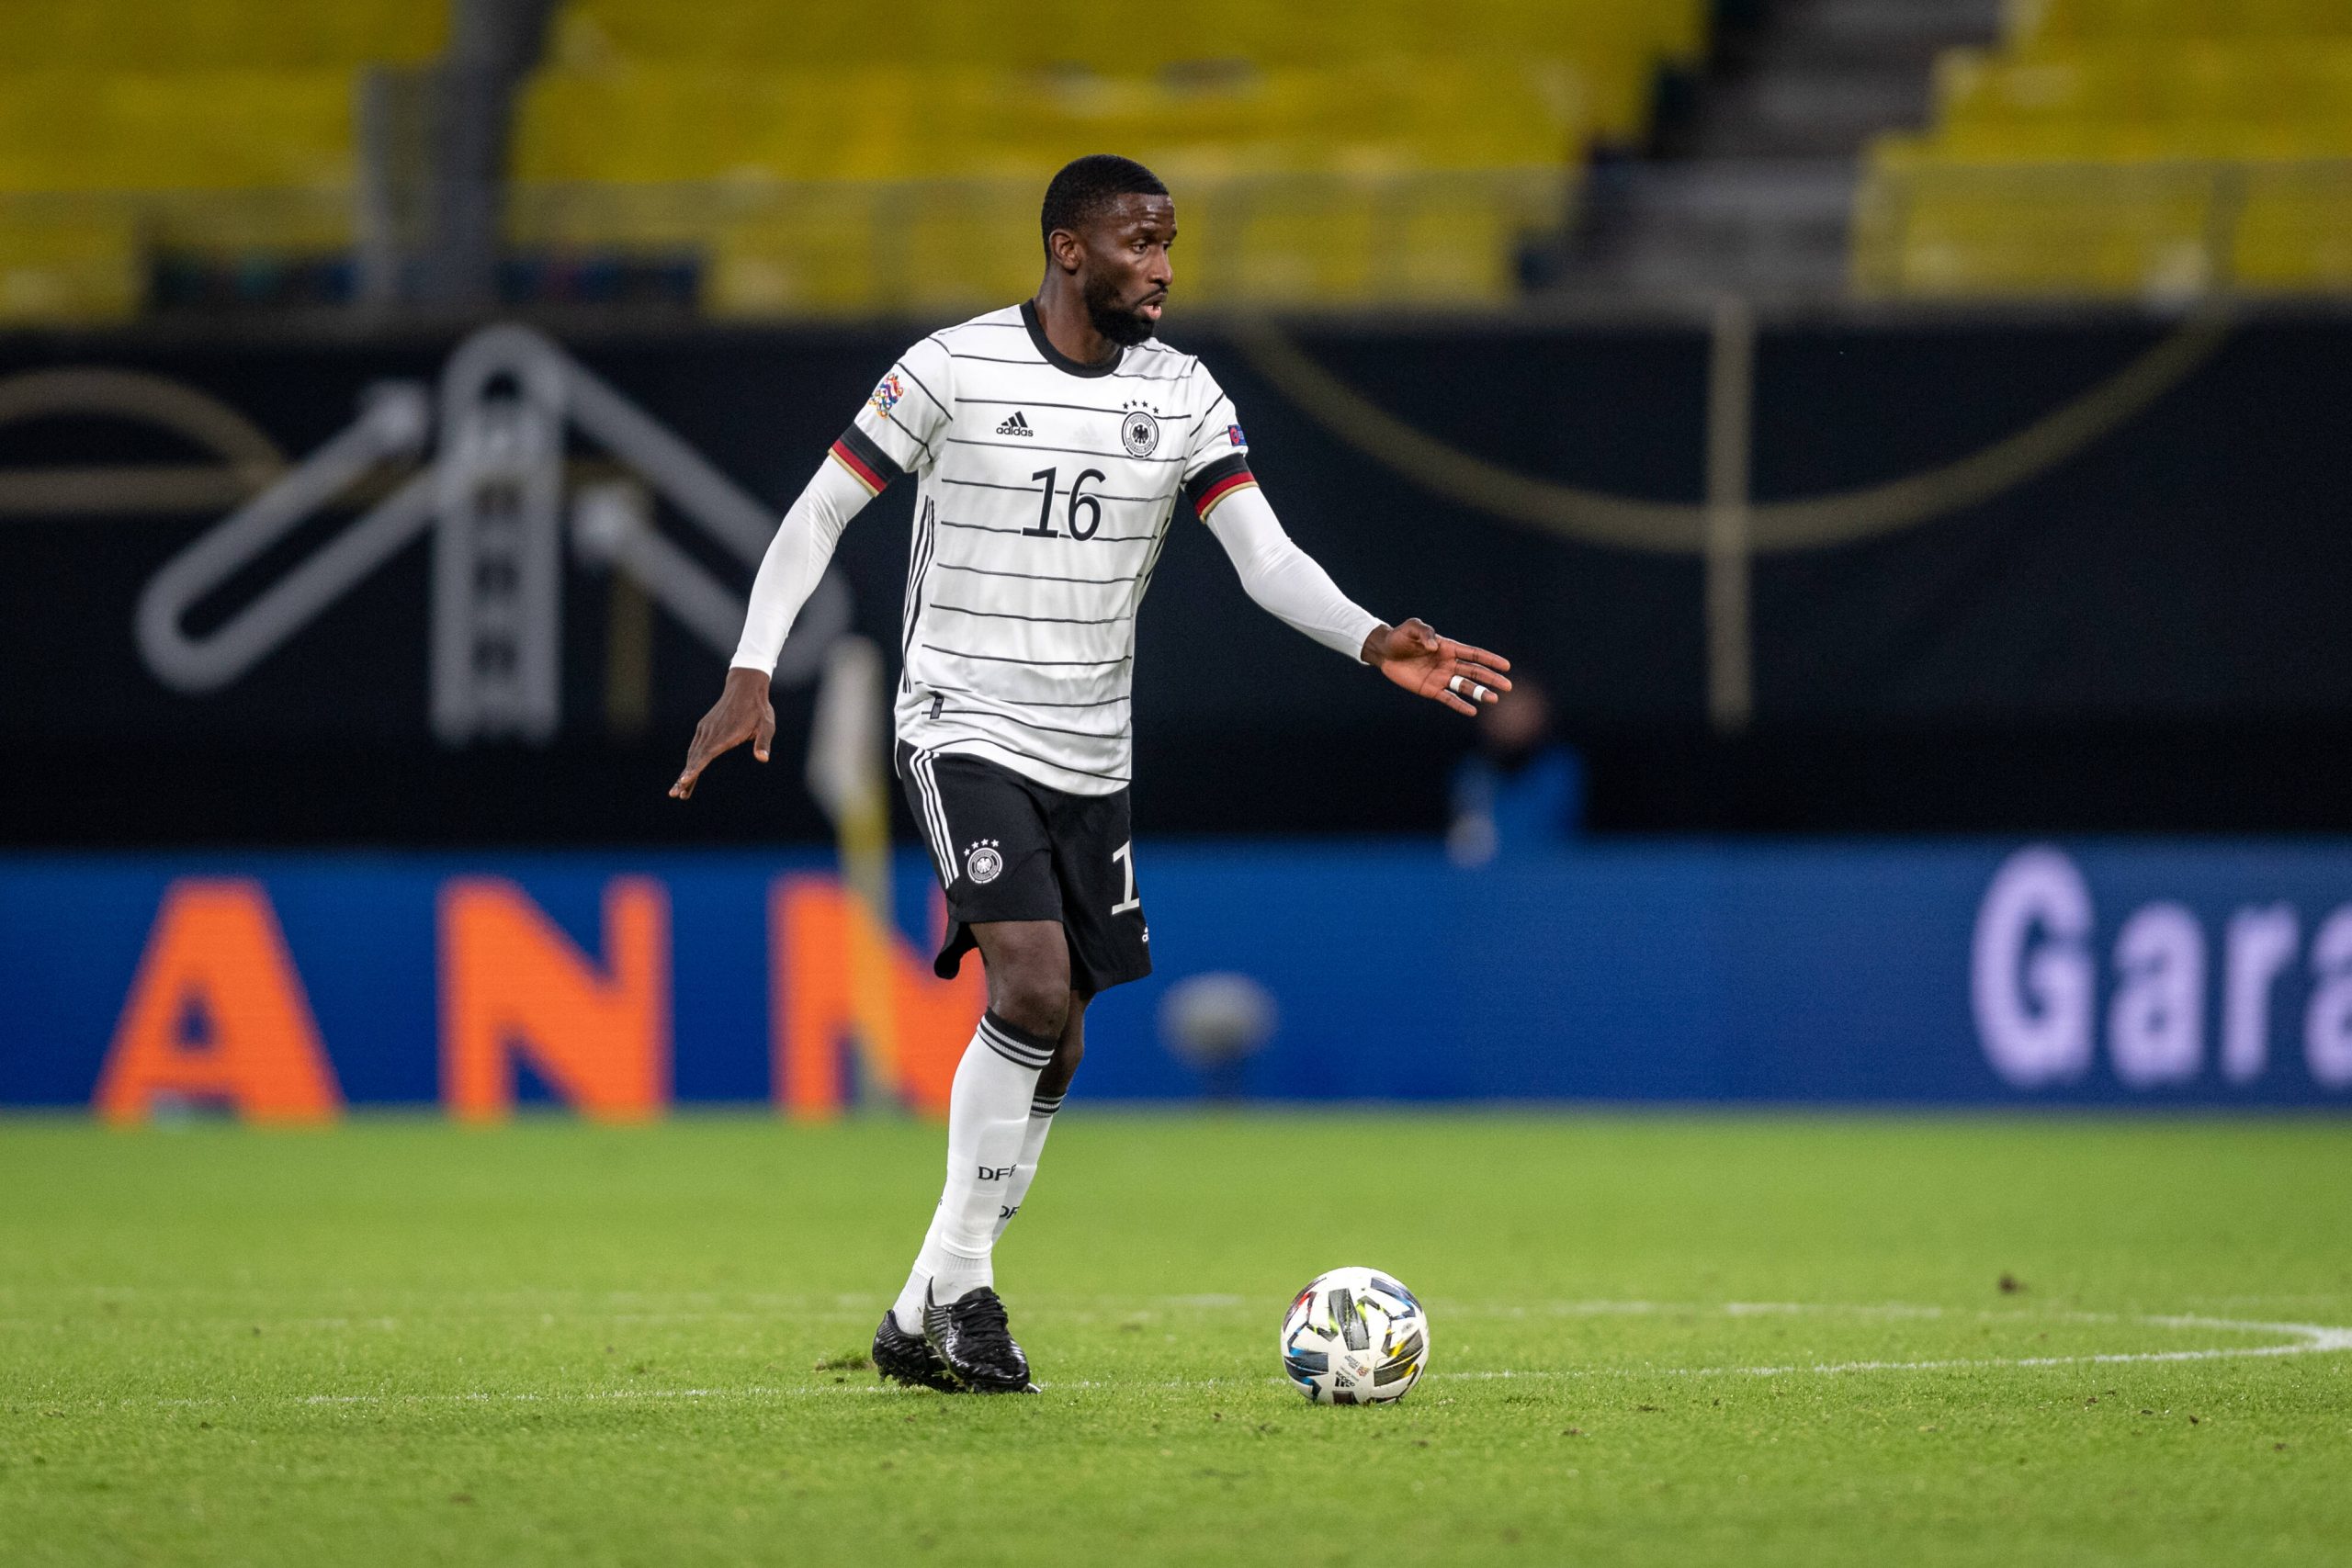 Transfer News: Barcelona lead Real Madrid in the race to sign Chelsea star Antonio Rudiger.